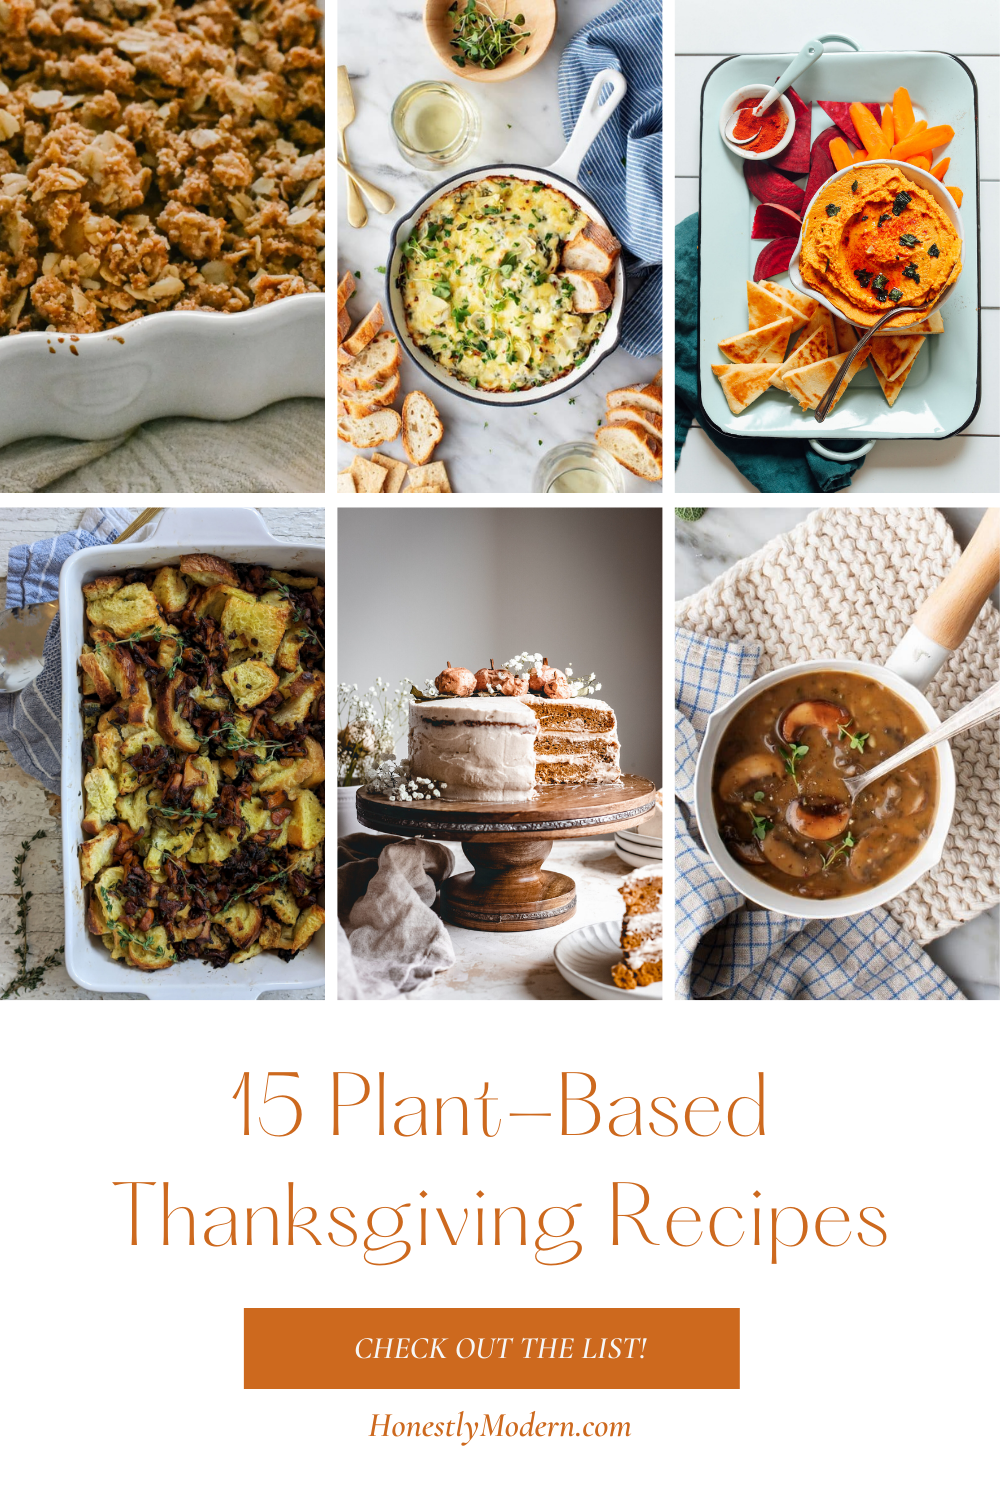 15 Plant-Based Thanksgiving Recipes For Families